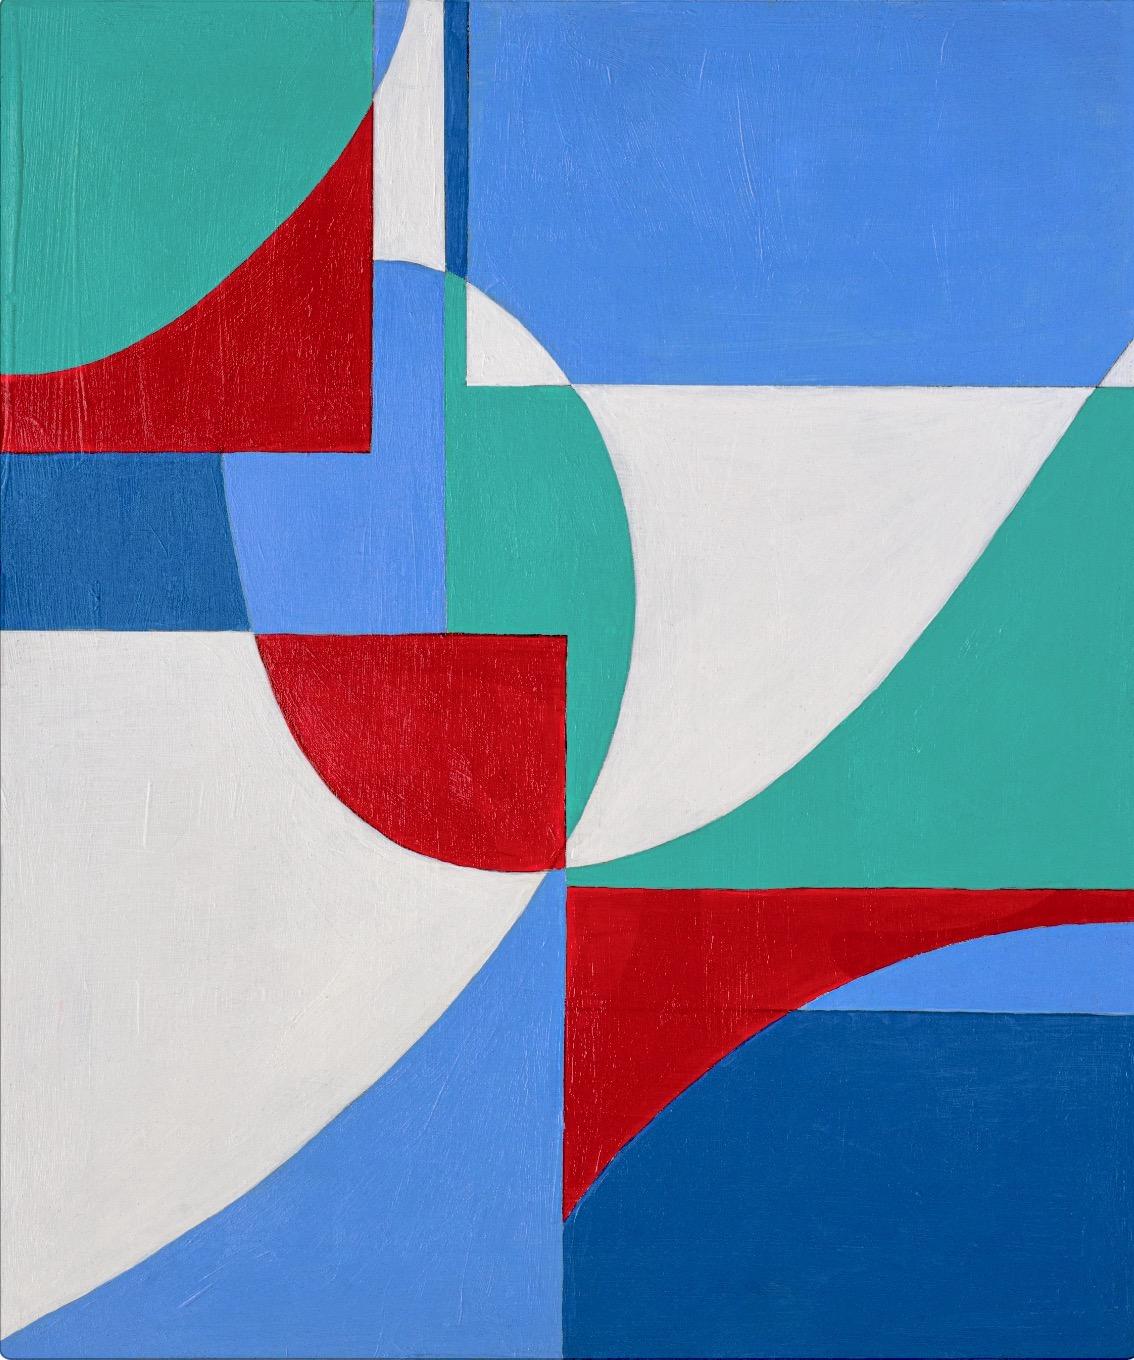 GA1221 Limited edition 2/10 giclee geometric abstraction signed print